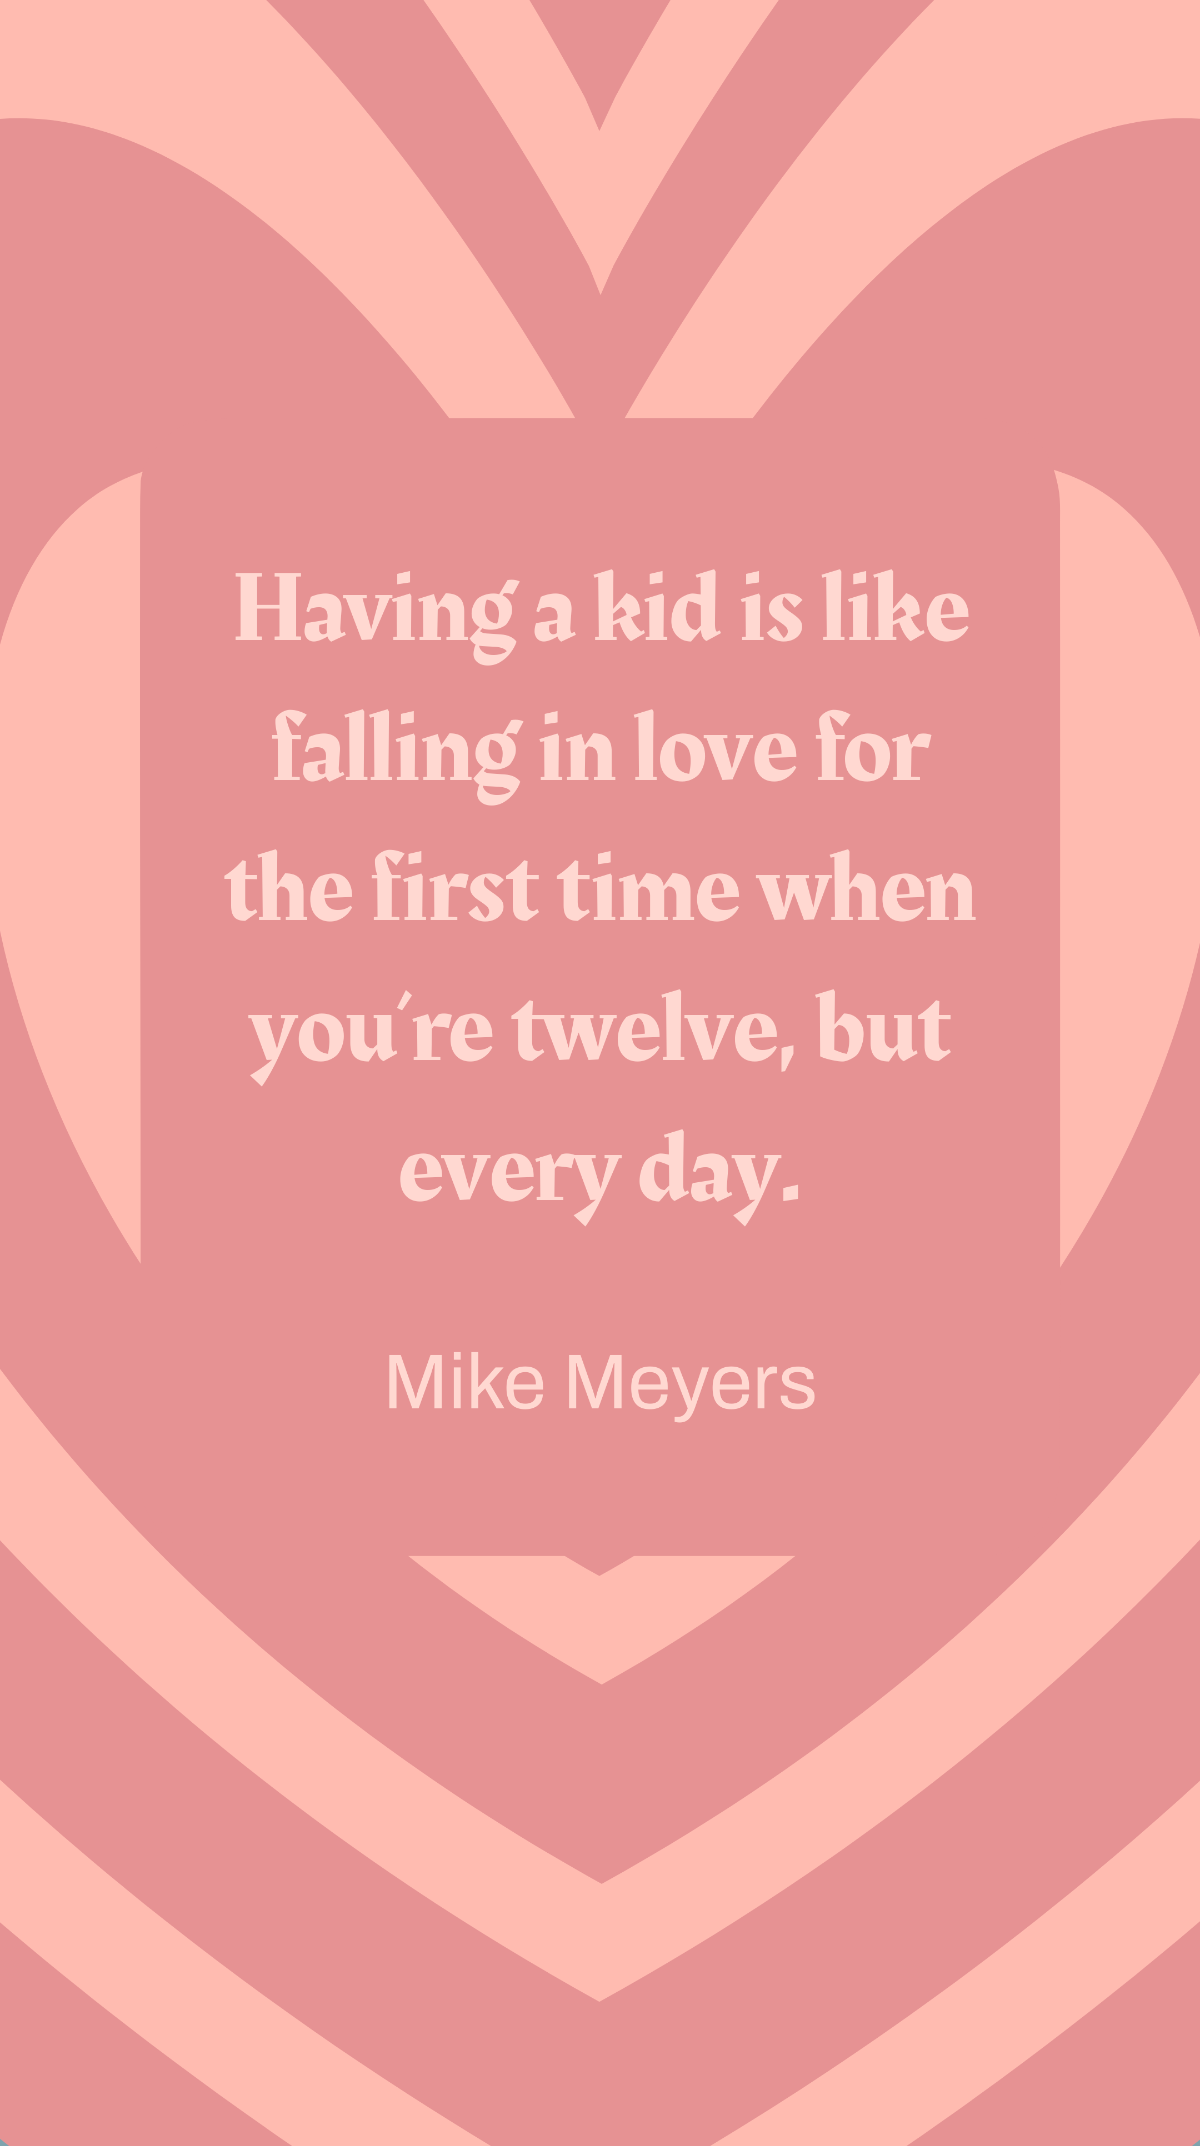 Mike Meyers -  Having a kid is like falling in love for the first time when you’re twelve, but every day.  Template